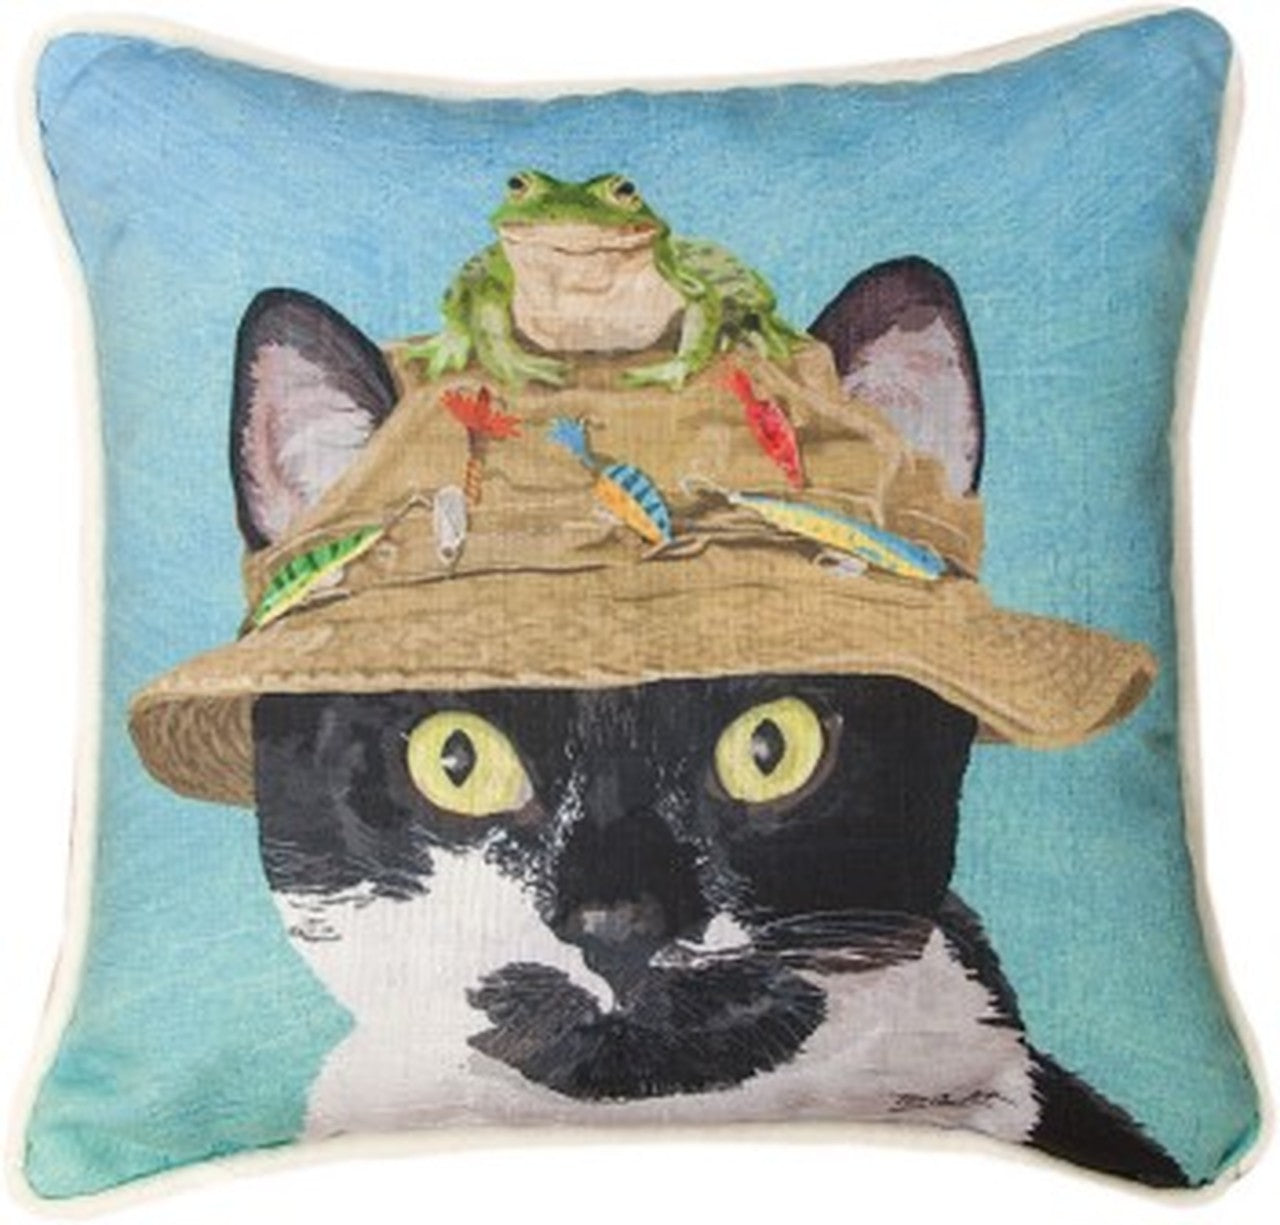 Cats In Hat with Frog Pillow